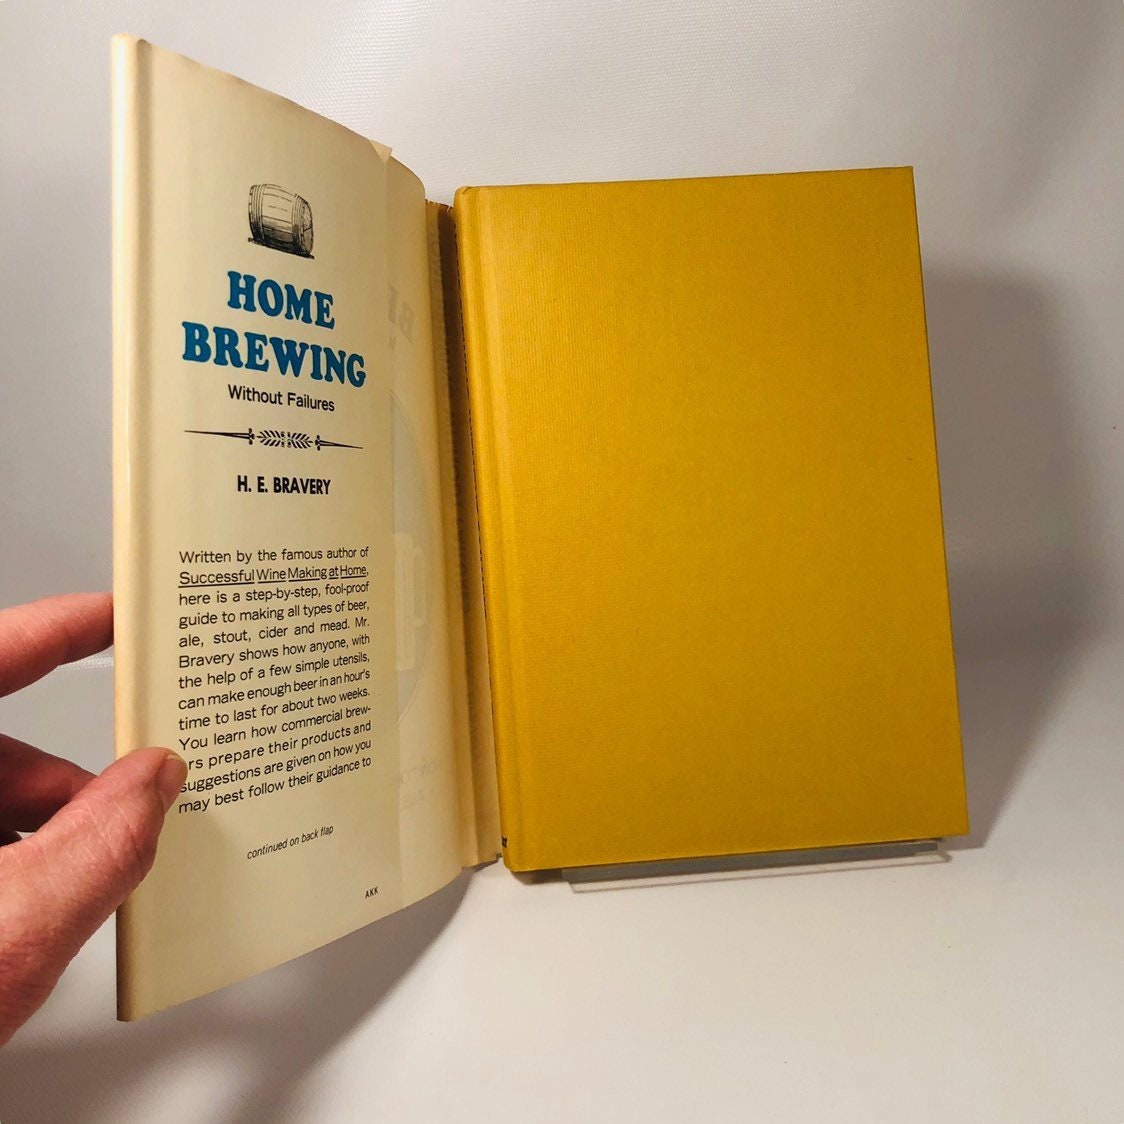 Home Brewing Without Failures by H.E. Bravery 1965 Vintage Book